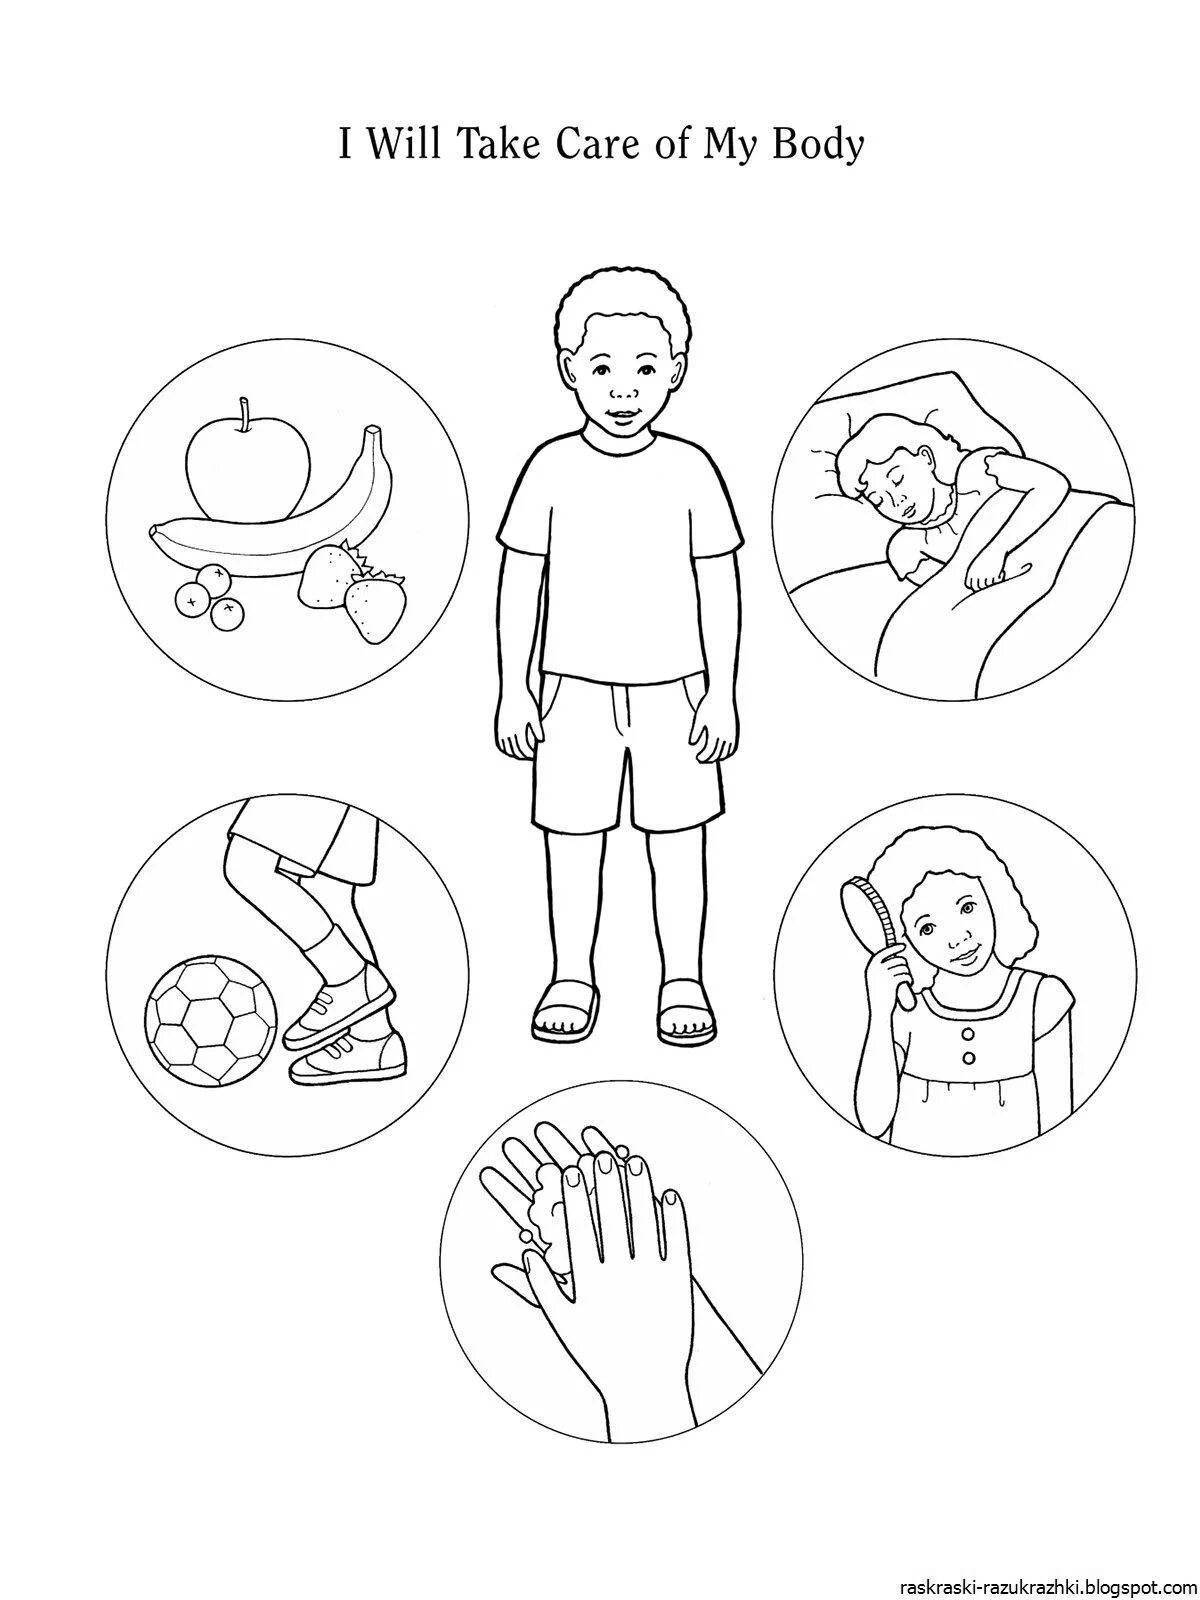 Joyful health coloring book for 3-4 year olds